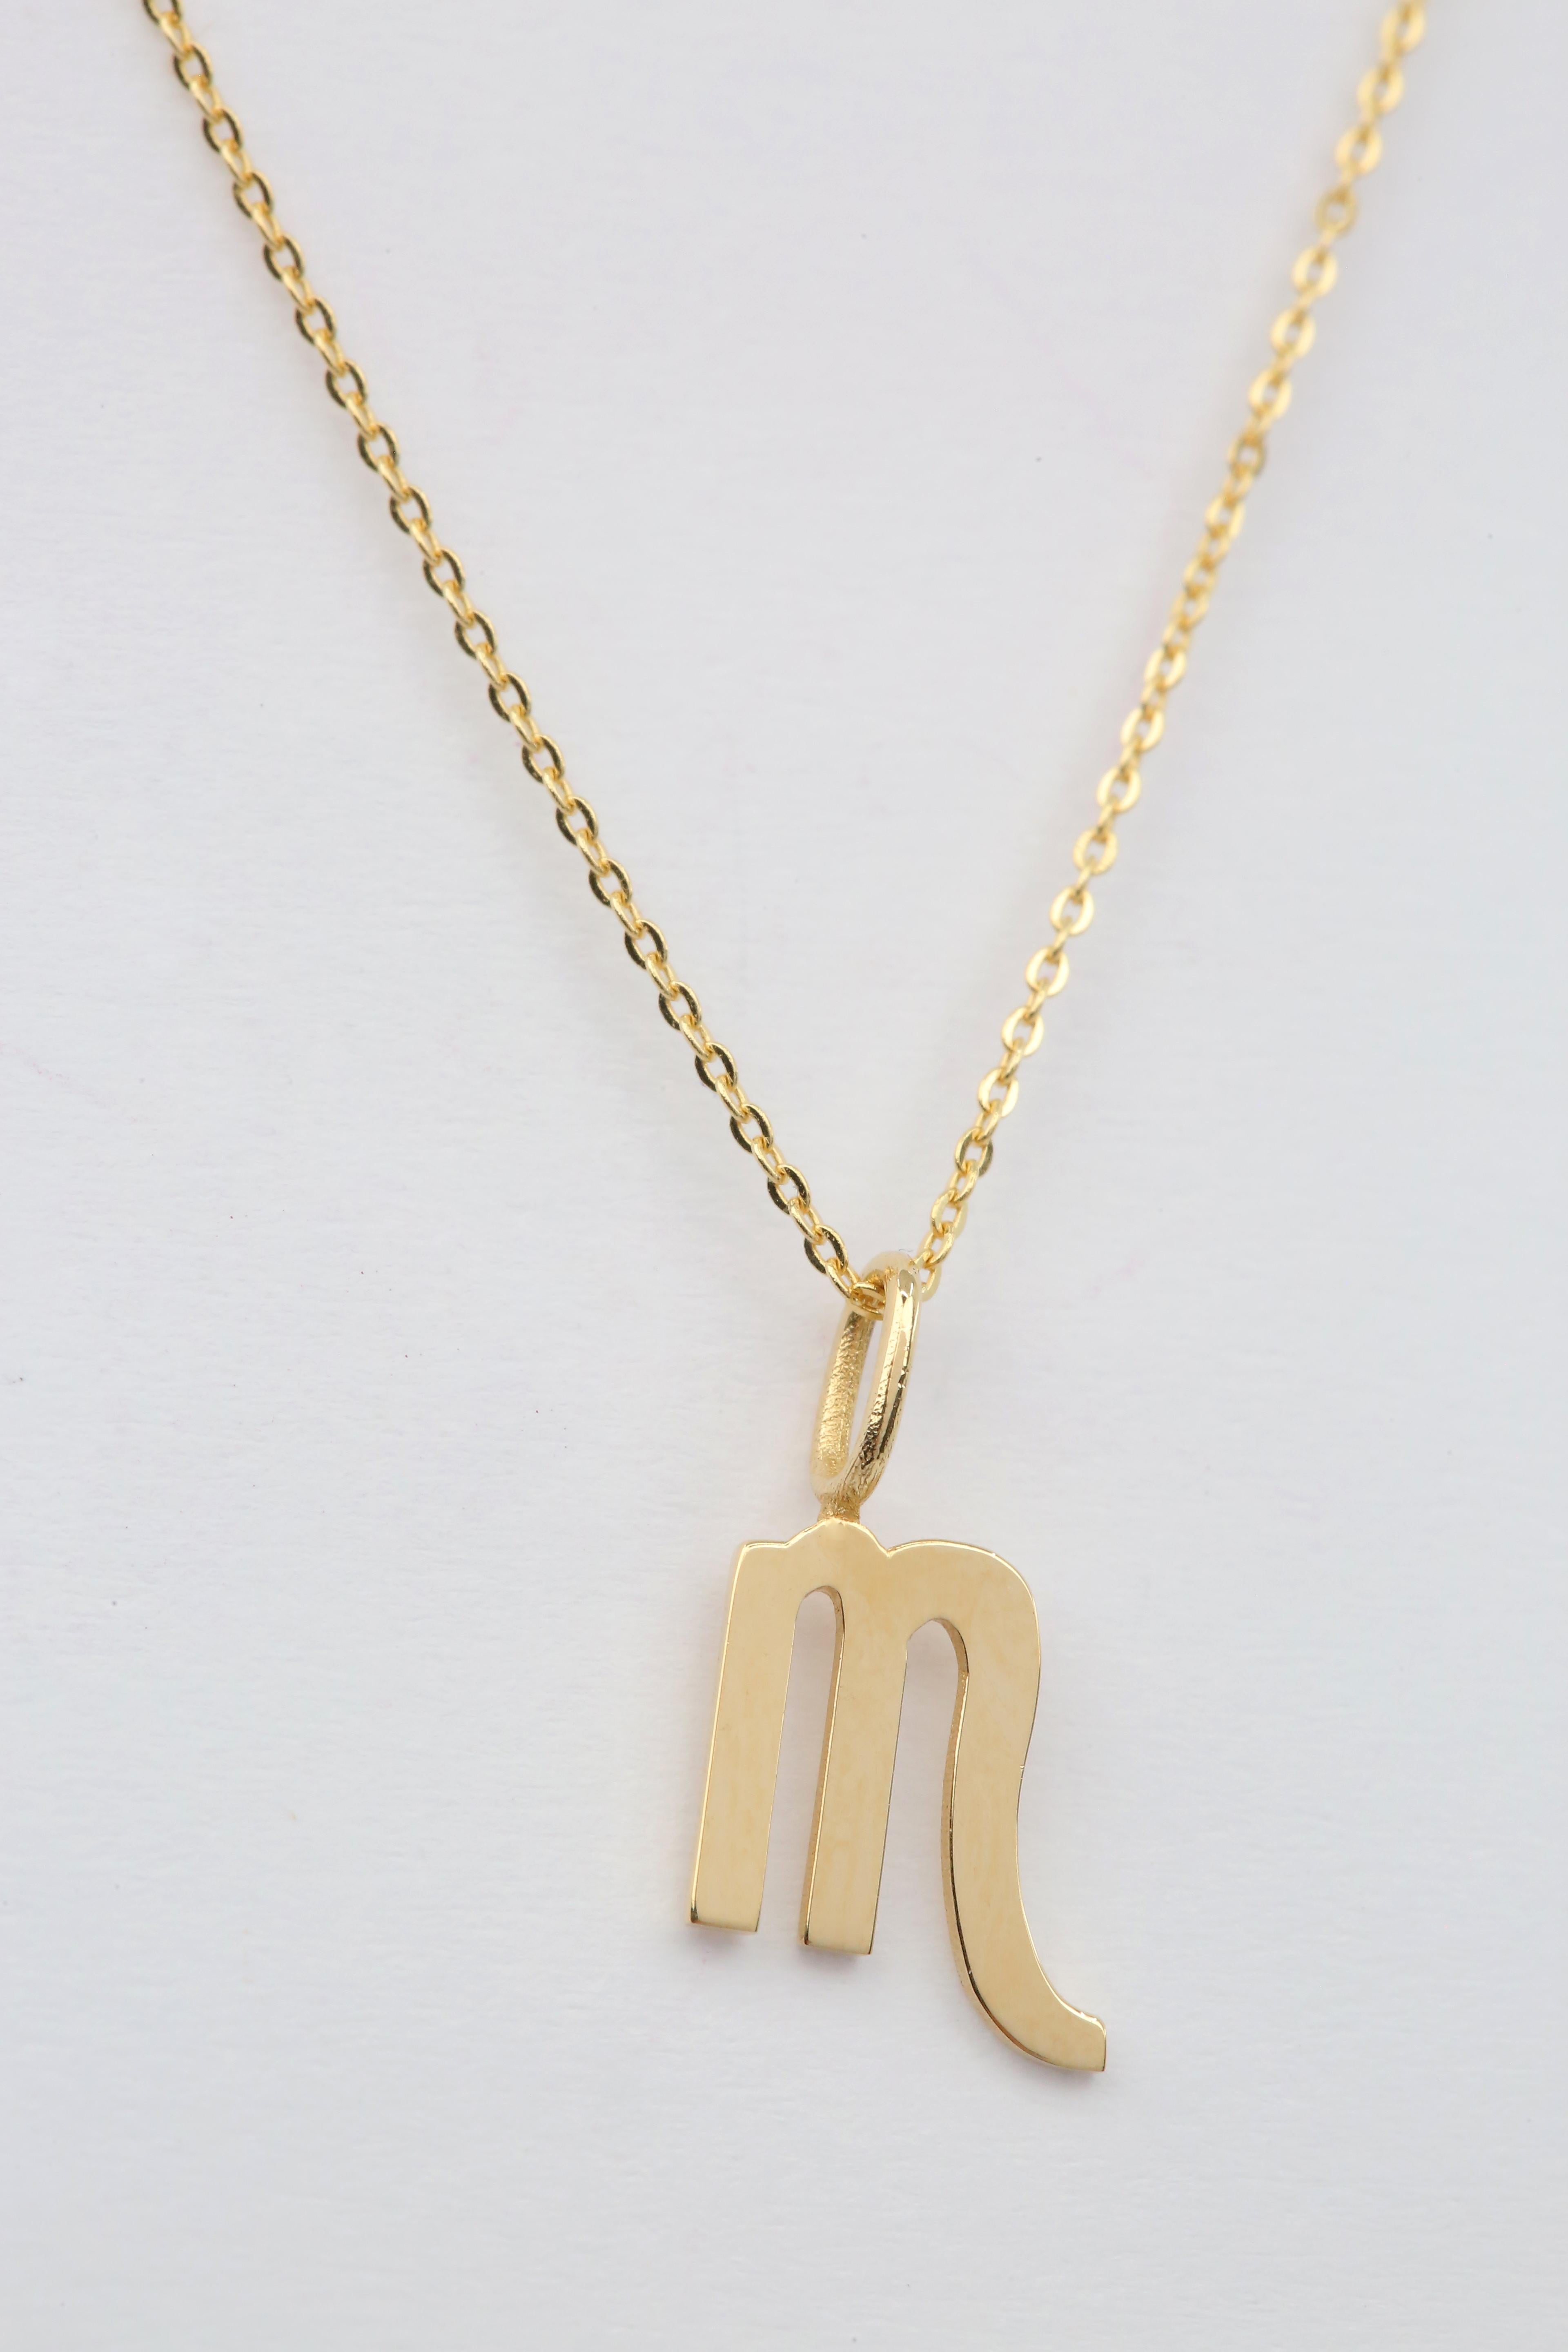 14K Gold Necklace Scorpio Sign Symbol Zodiac Collection Necklace

*The product is the Scorpio Zodiac Symbol.

It’s a manual labour product. ‘Handmade’. Fashionable product. 

This necklace was made with quality materials and excellent handwork. I